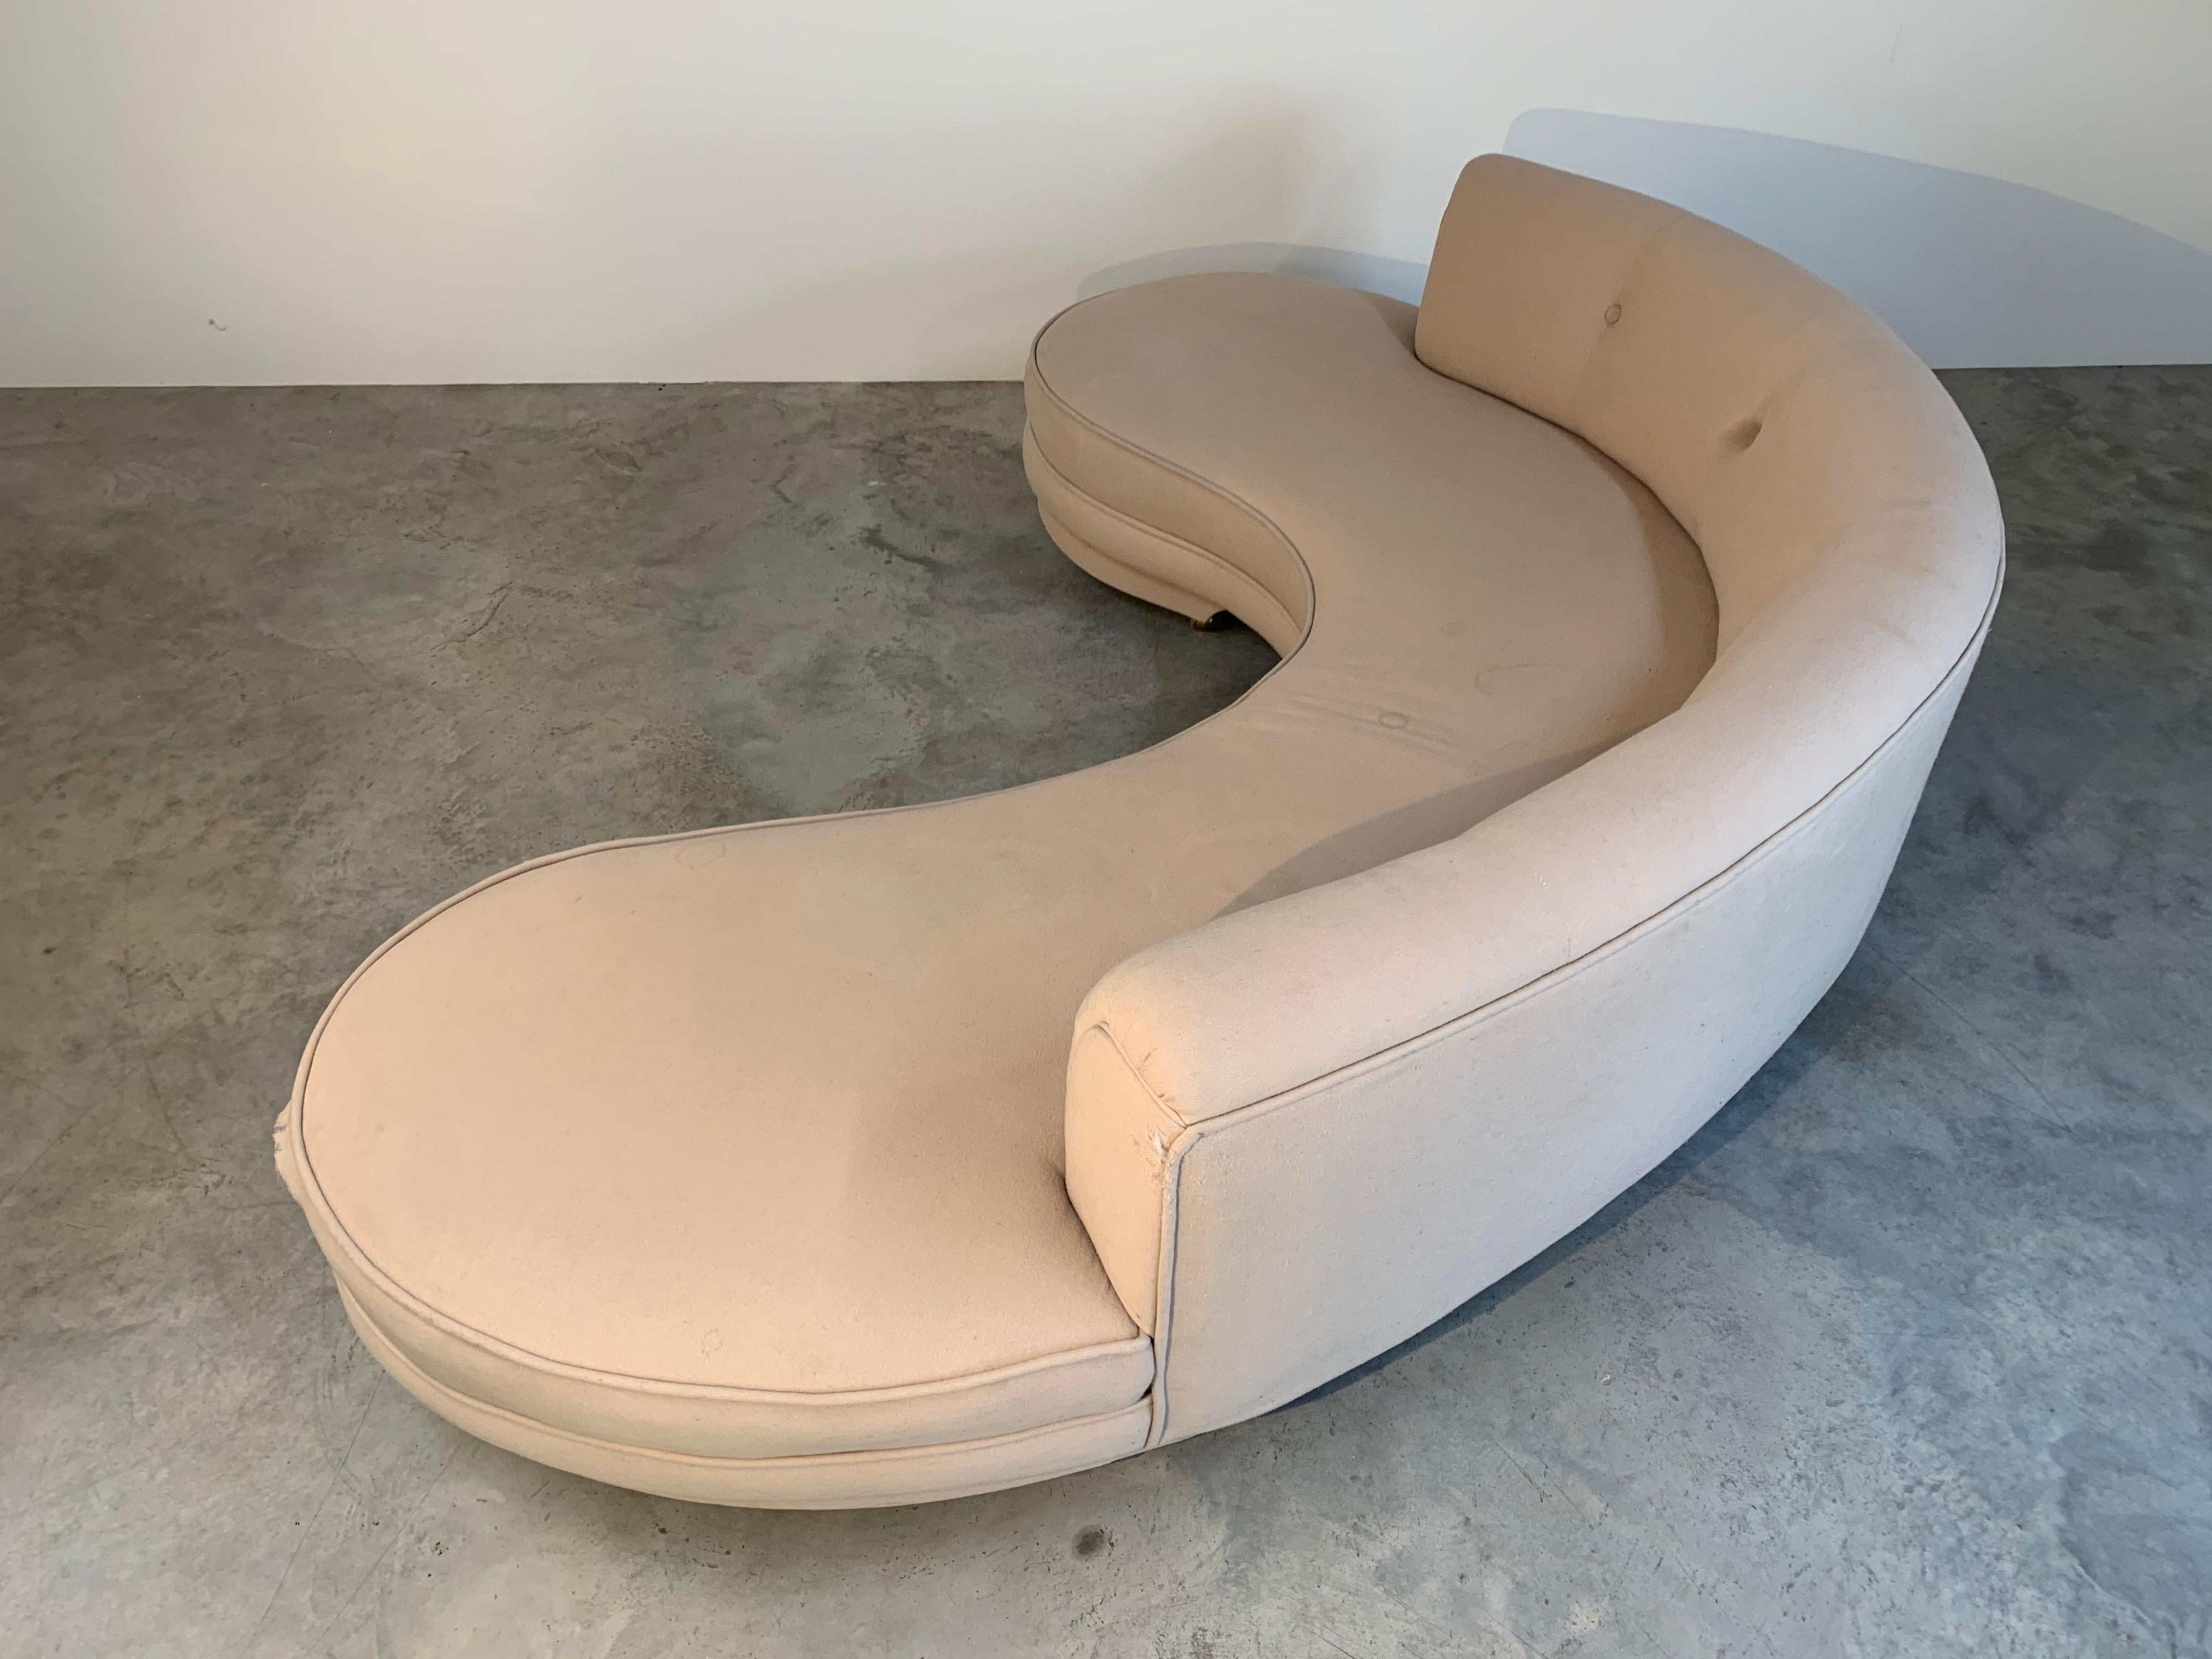 Beautiful serpentine sofa with over ball casters. Circa 1950
Total width 108”
Total depth 66”
Upholstery is needed. Structure is solid with casters that roll smoothly.